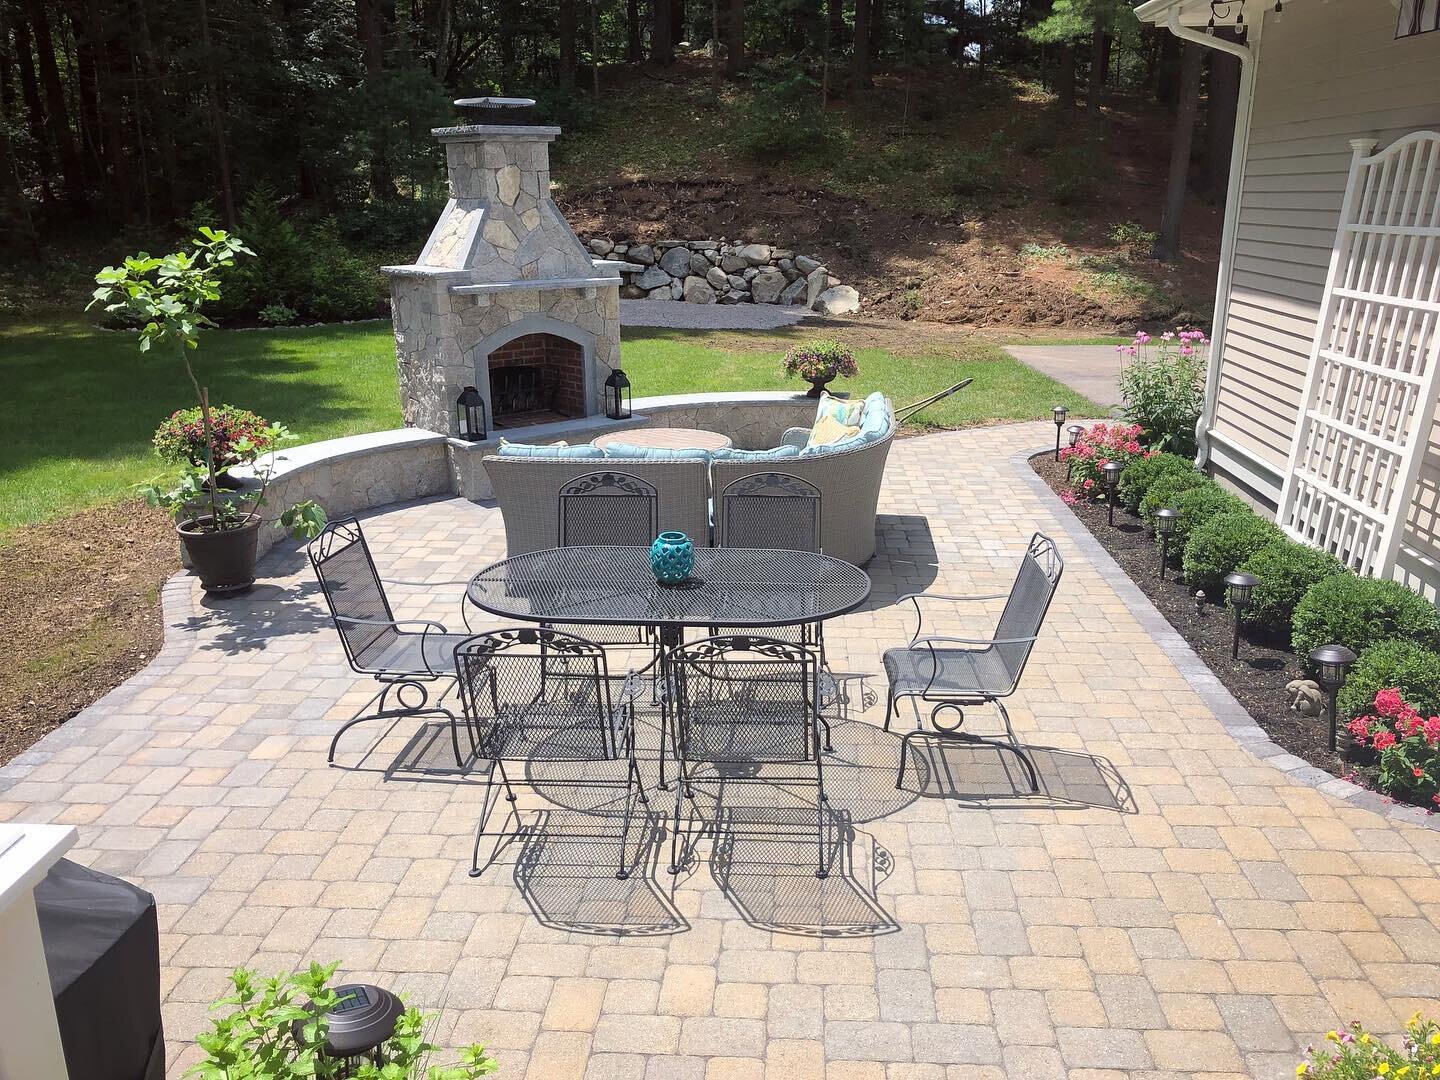 Staying home isn&rsquo;t so bad with this back yard update. Stone pizza oven with sitting wall and large paver patio with garden bed.